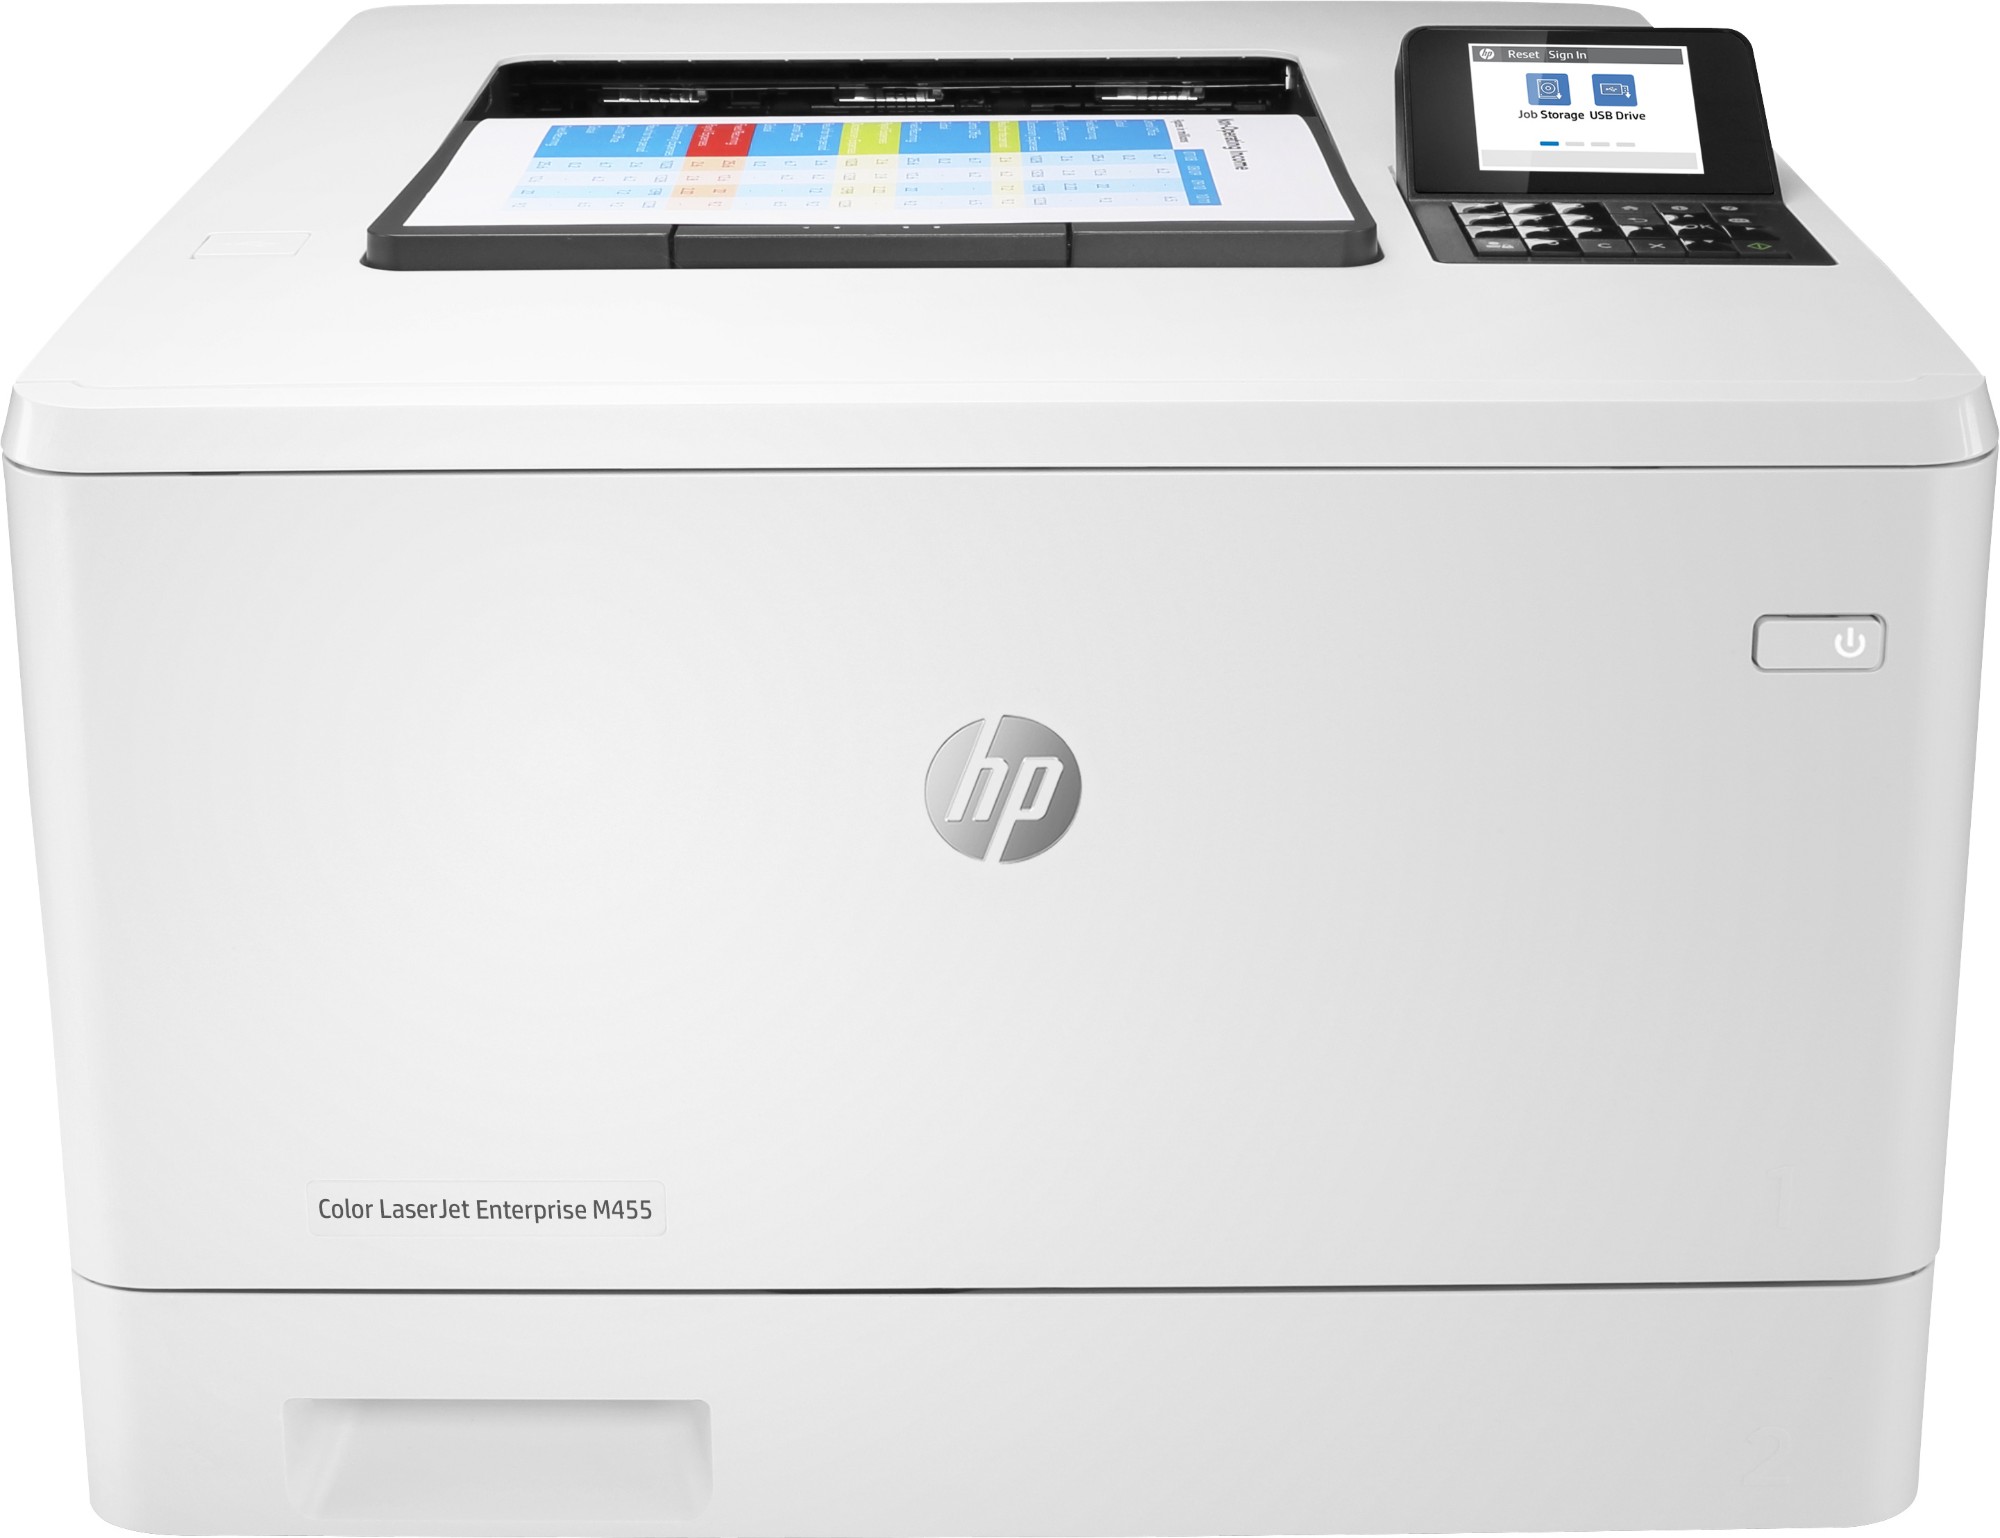 HP Colour LaserJet Enterprise M455dn, Colour, Printer for Business, Print, Compact Size; Strong Security; Energy Efficient; Two-sided printing